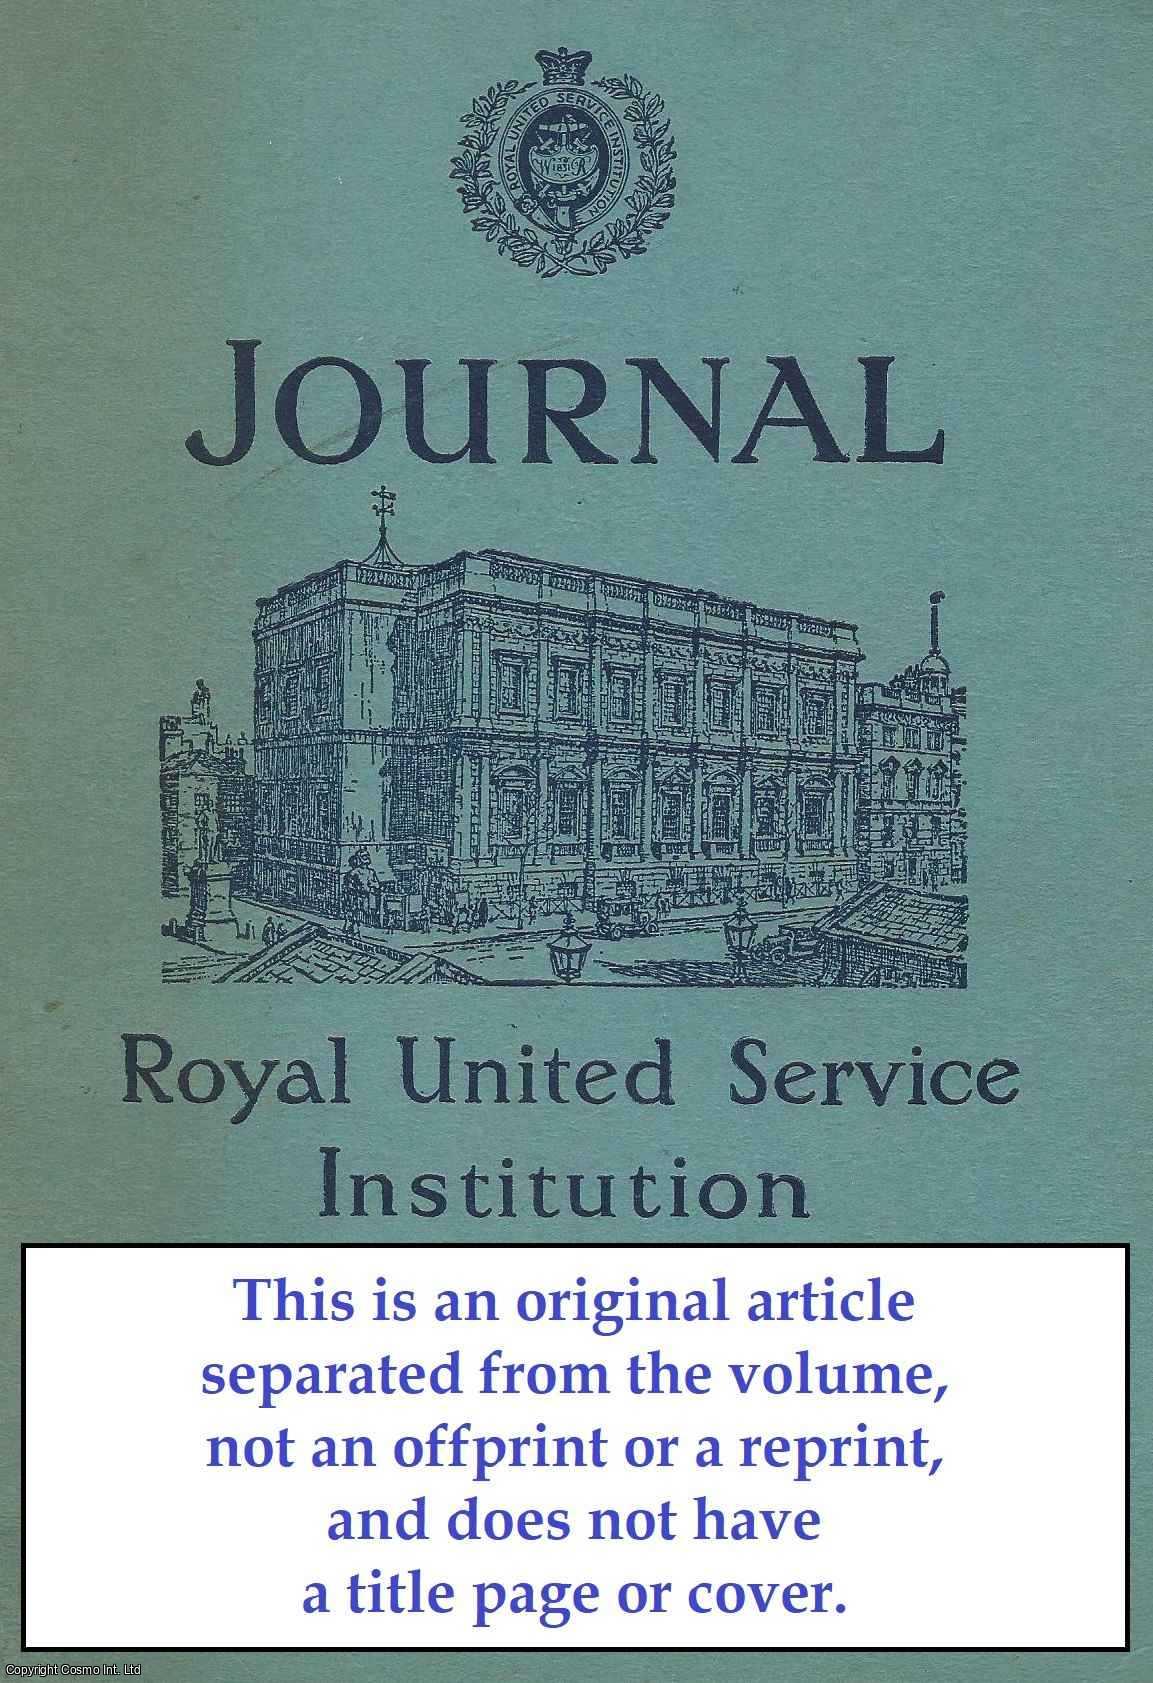 John Baynes - The Volunteer Reserve Army. An original article from The Journal of The Royal United Services Institute for Defence Studies, 1972.